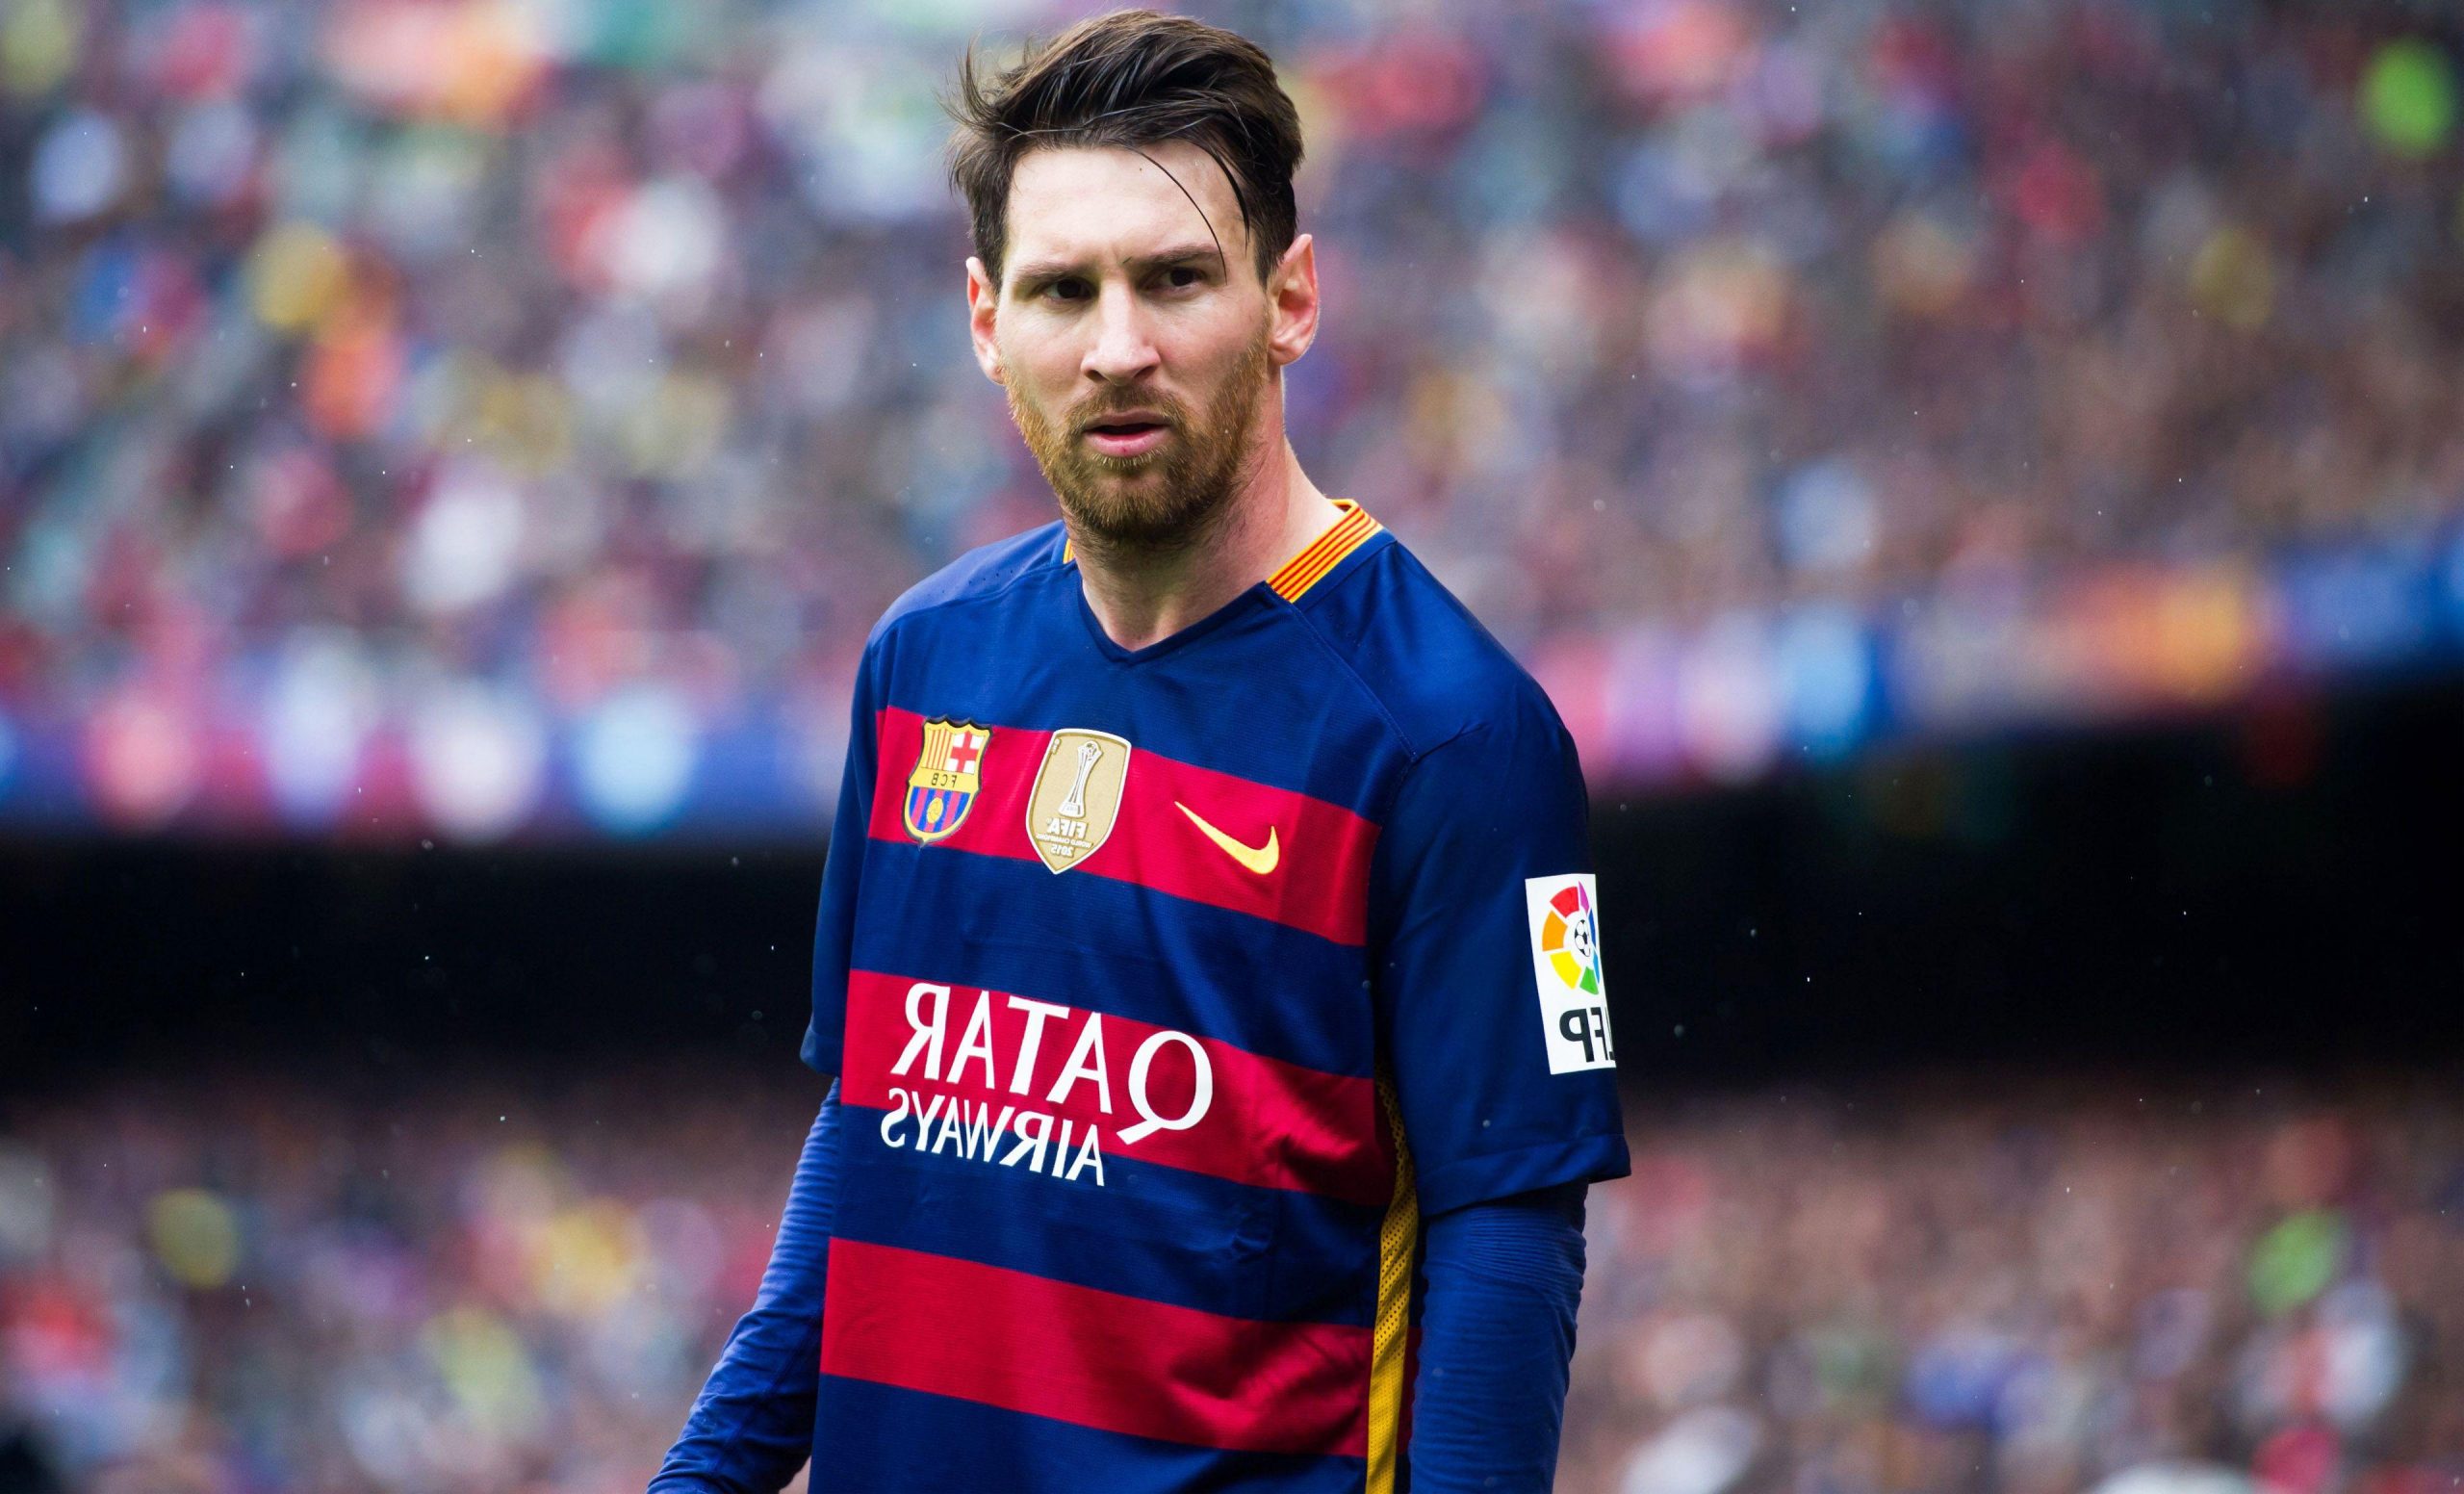 lionel messi wallpapers hd 4k 52